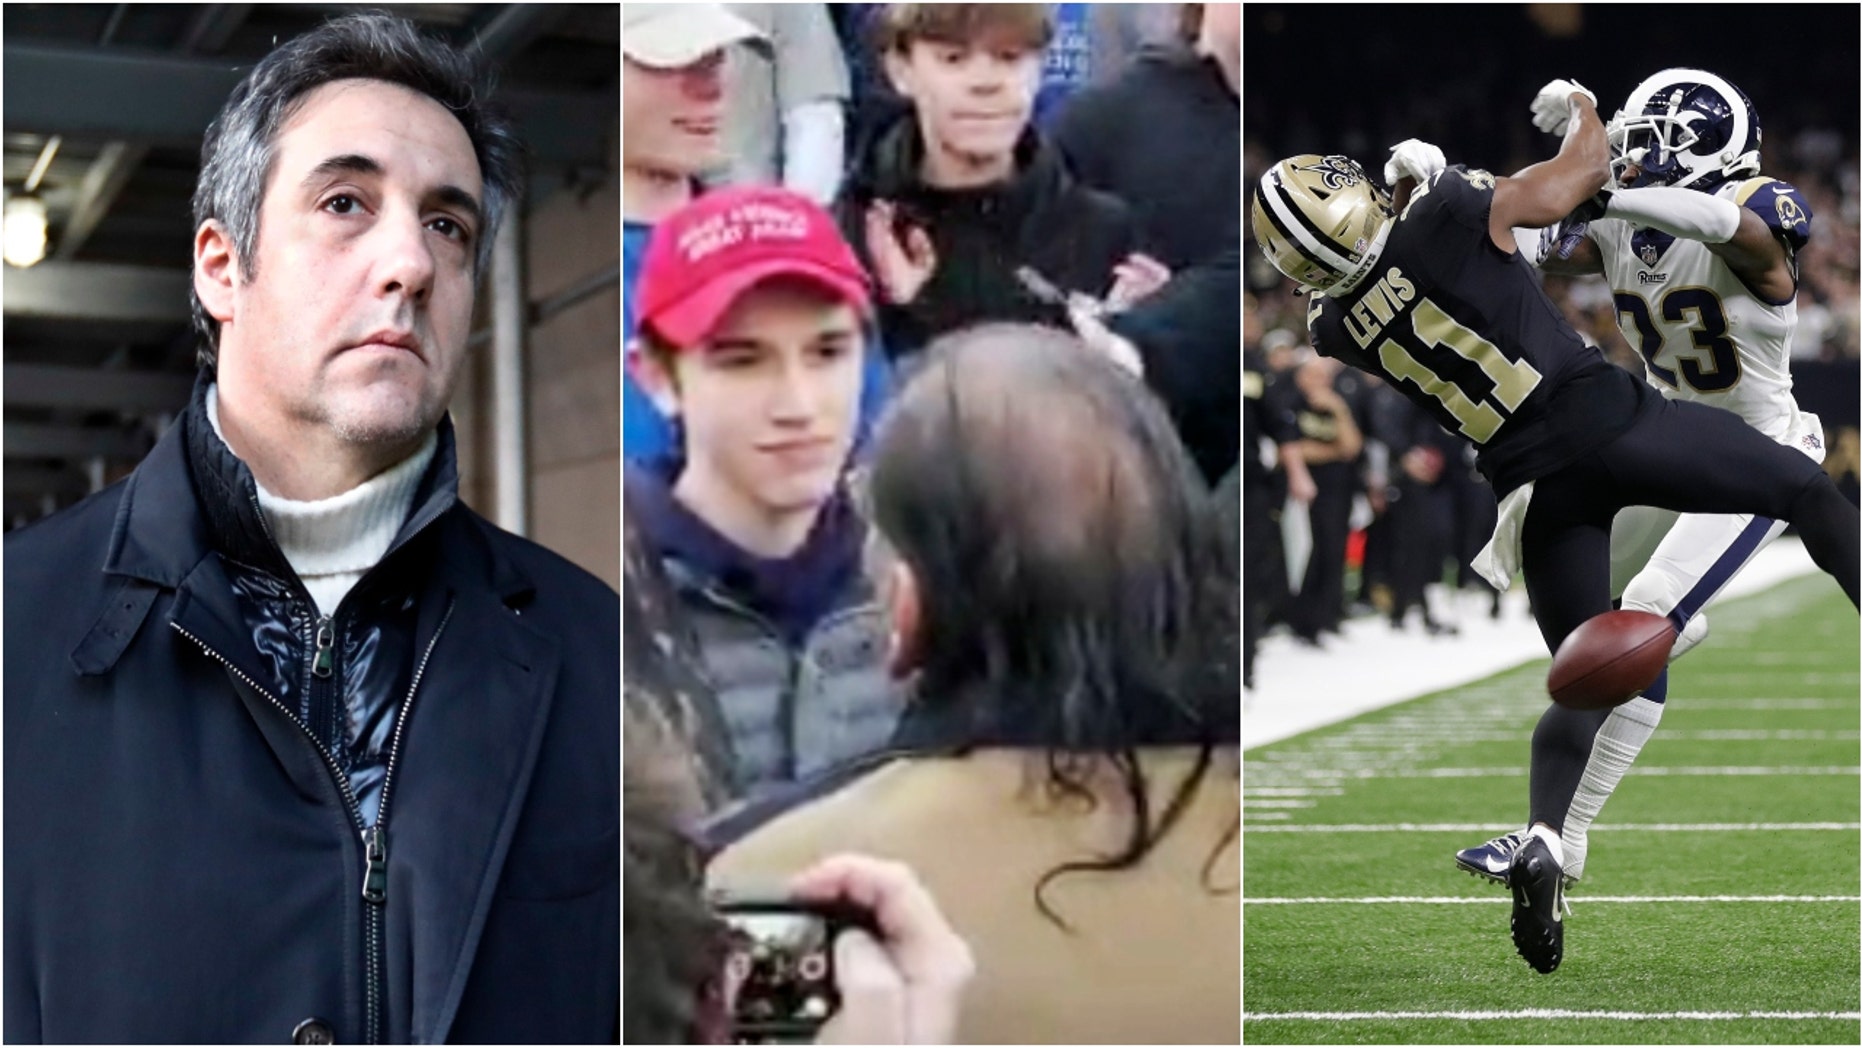 BuzzFeed, Covington, NFL controversies make for busy weekend in Court of Public Opinion